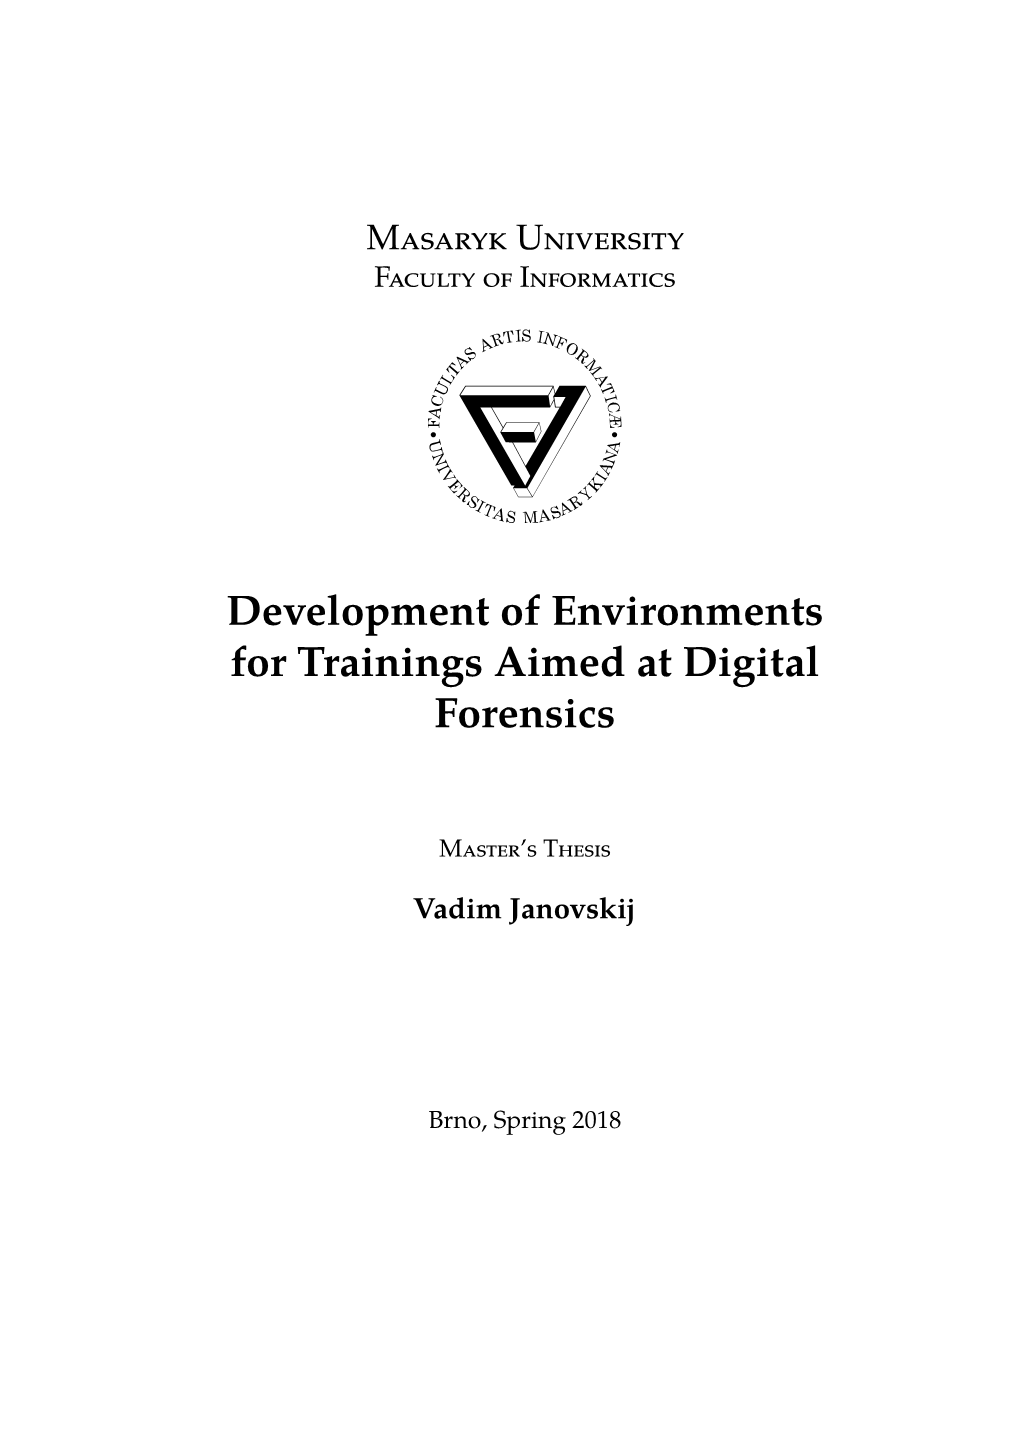 Development of Environments for Trainings Aimed at Digital Forensics